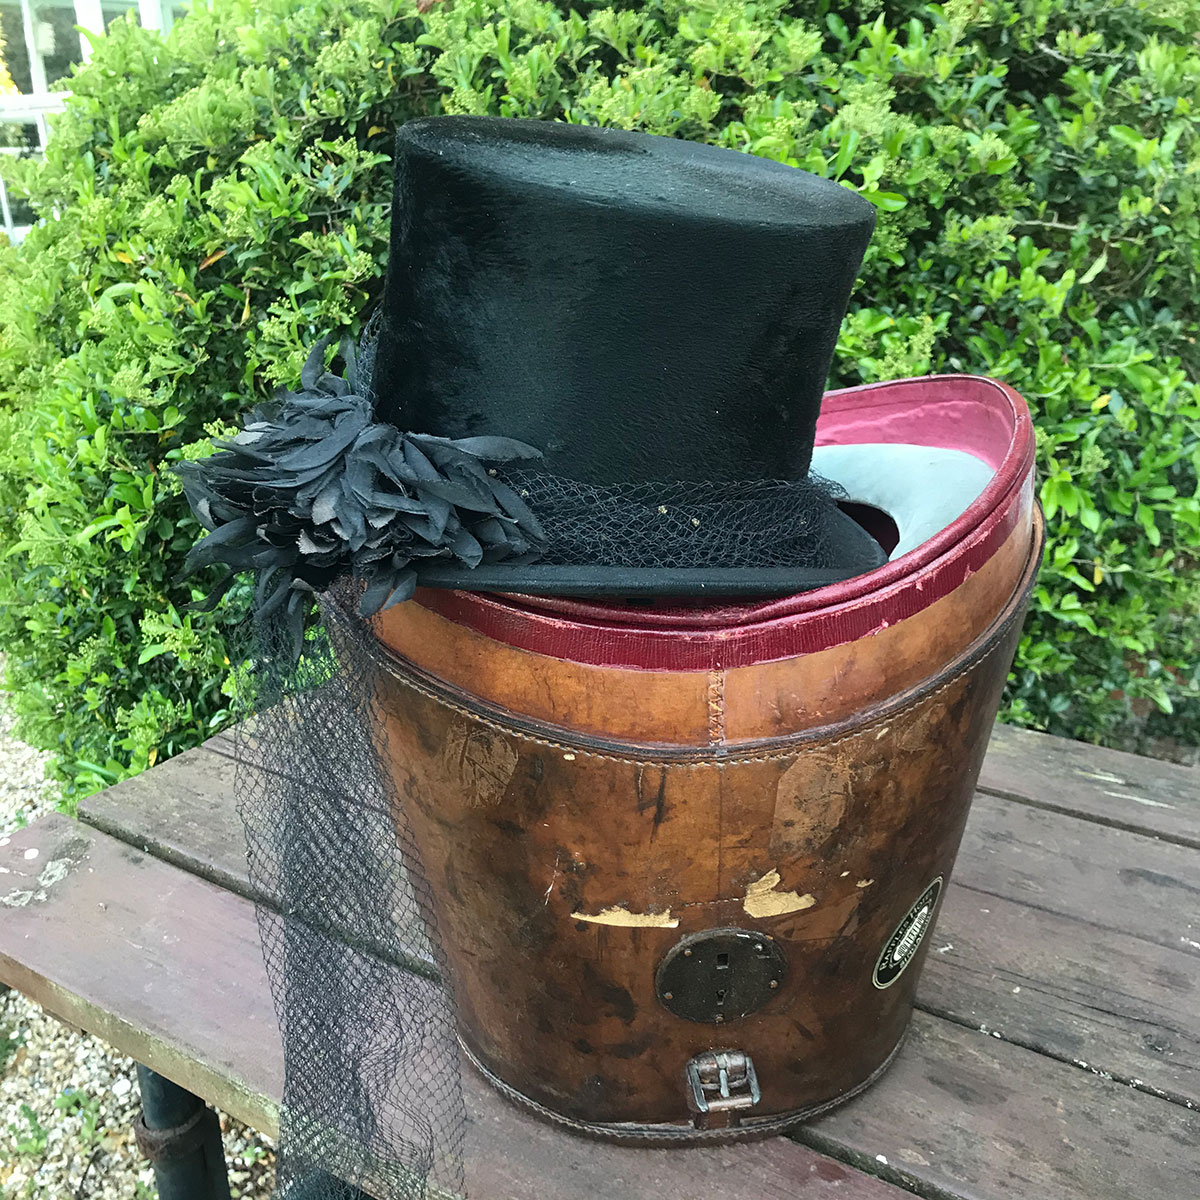 Ladies Riding Hat with Veil in Fitted Leather Hatbox